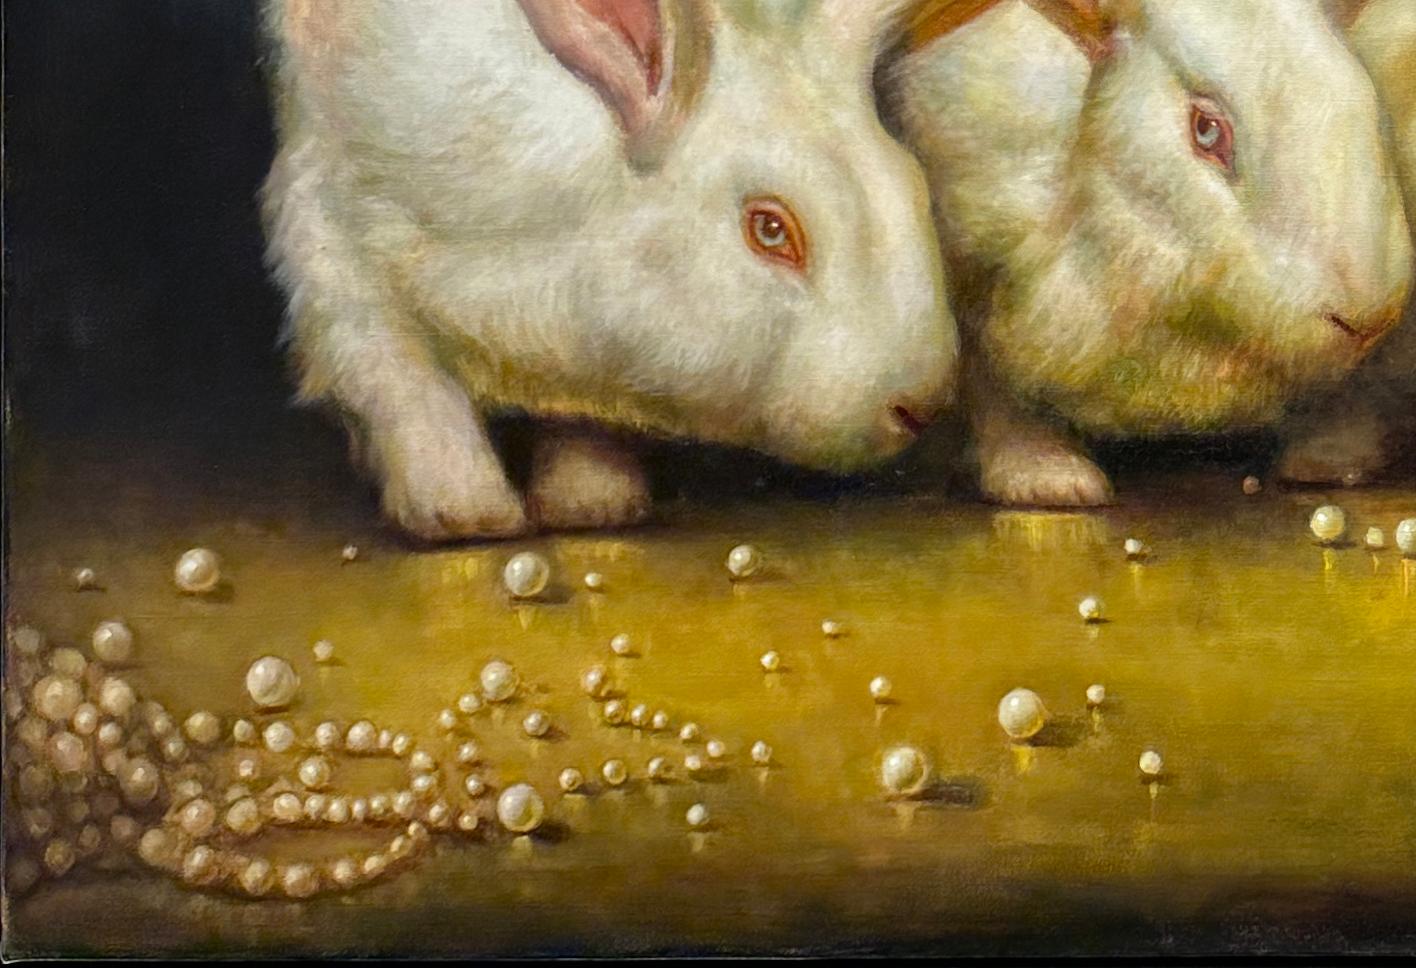 The Wise Ones - Three Rabbits Amongst a Broken Strand of Pearls, Original Oil - Contemporary Painting by Rose Freymuth-Frazier